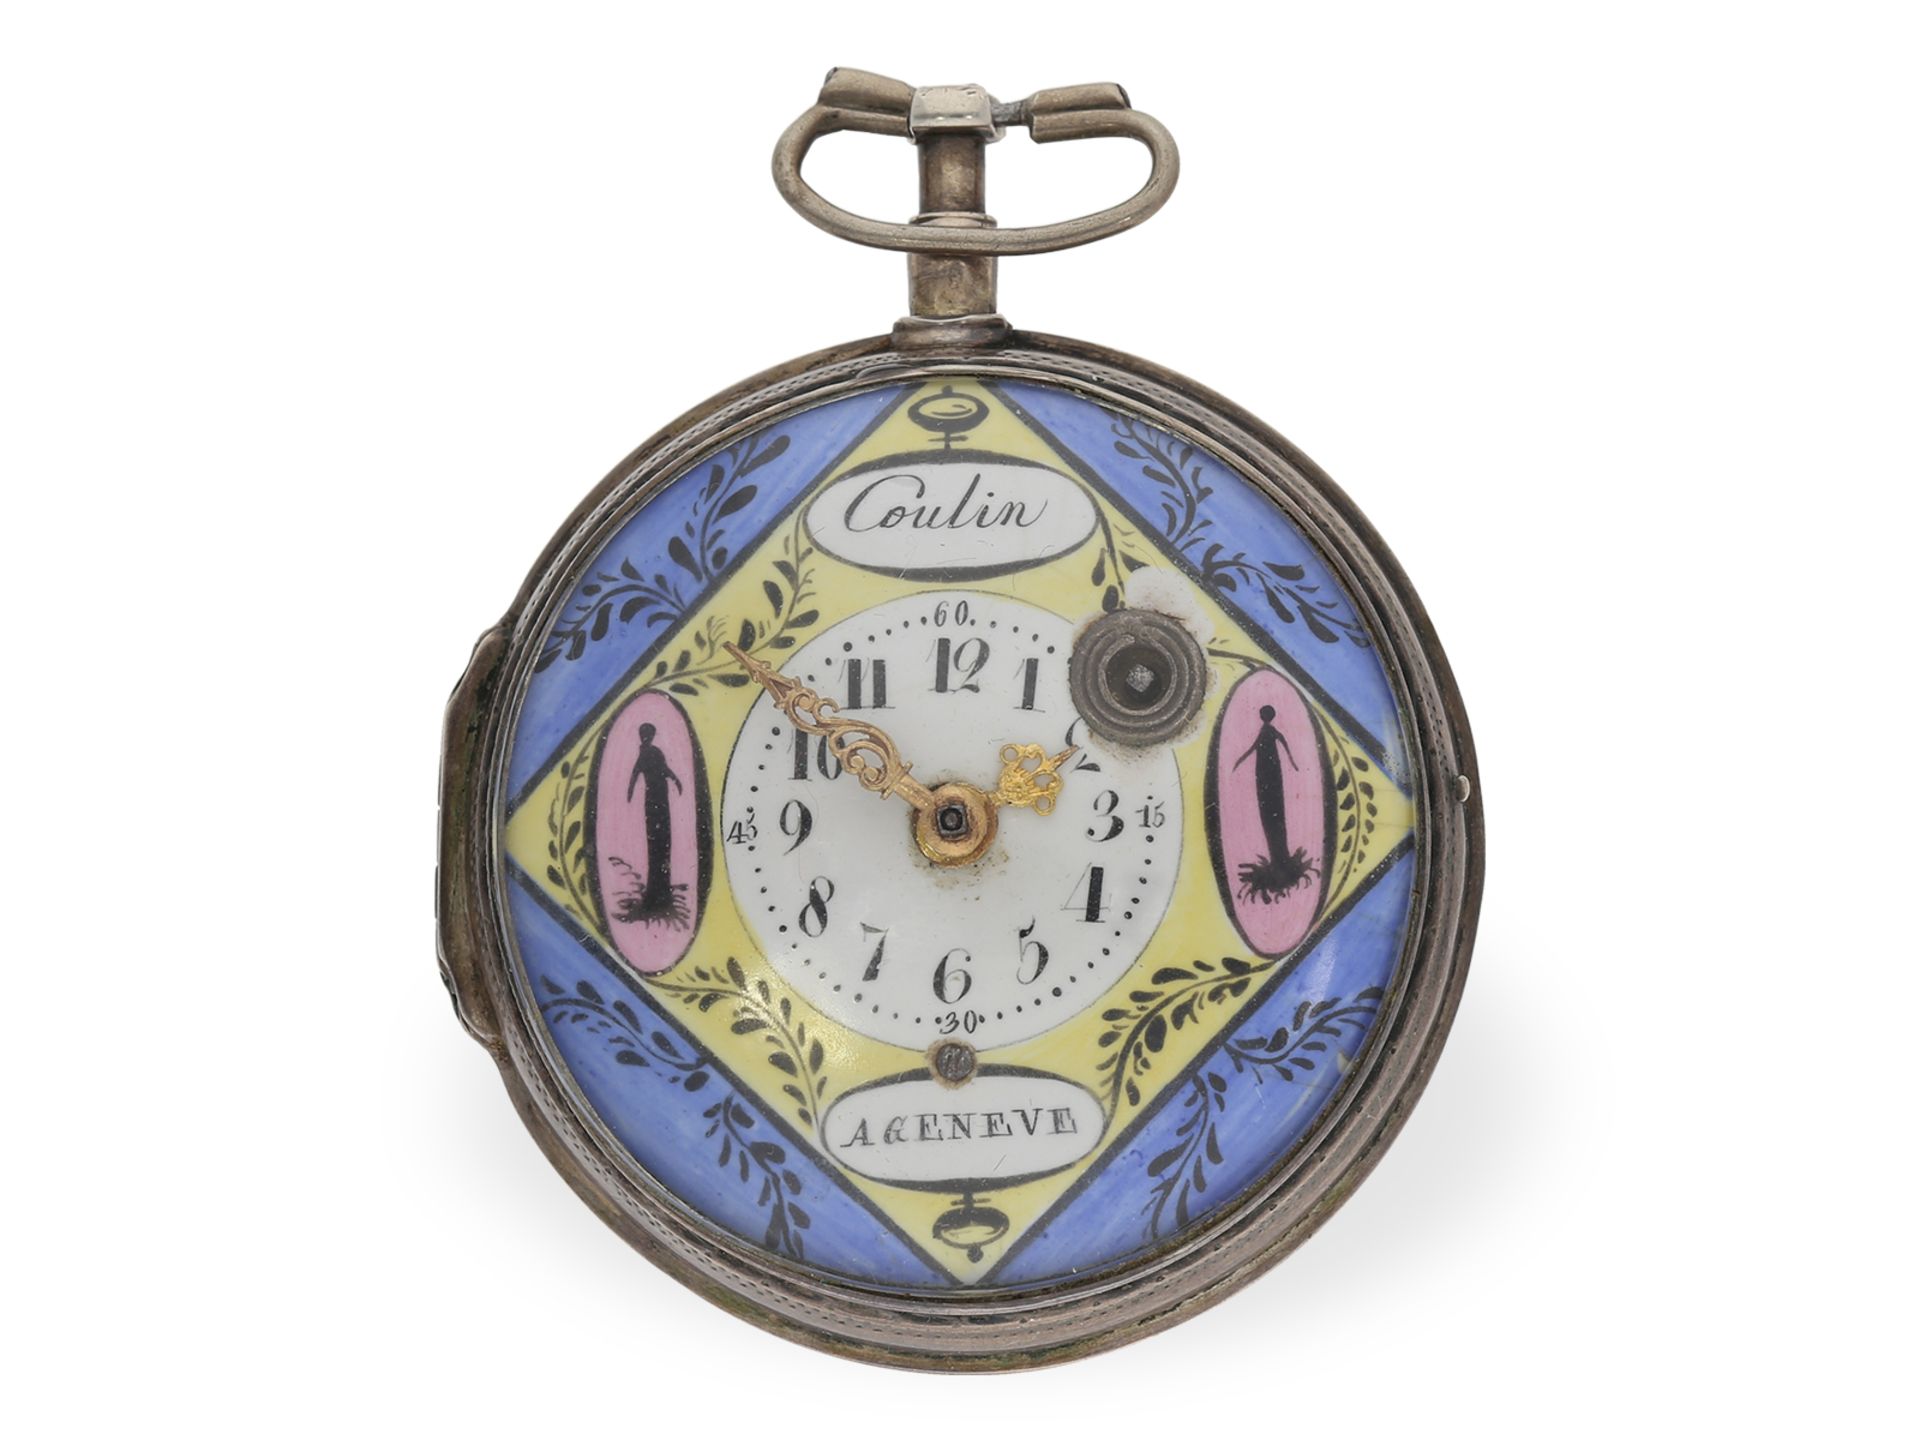 Pocket watch: attractive verge watch with multicoloured enamel dial, Coulin Geneve ca. 1780